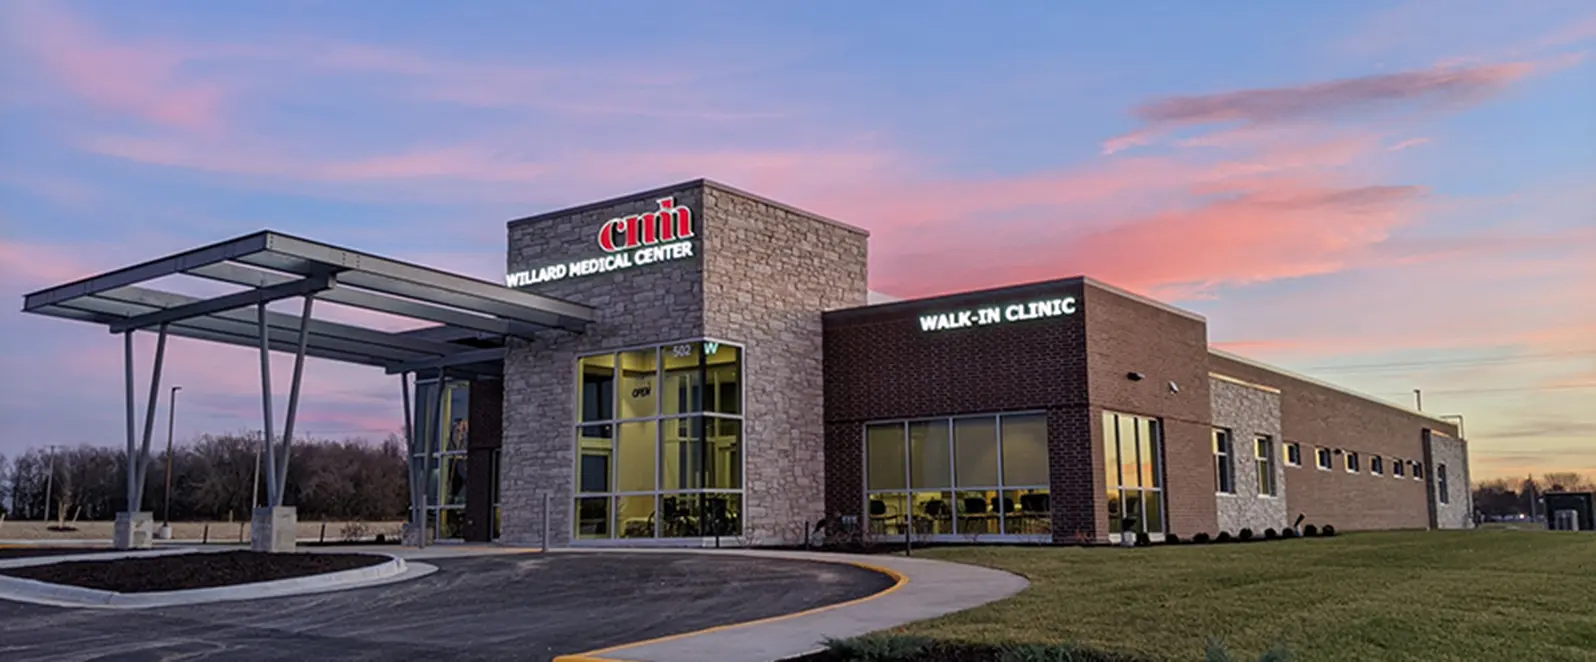 Willard Medical Center and Walk‑In Clinic exterior